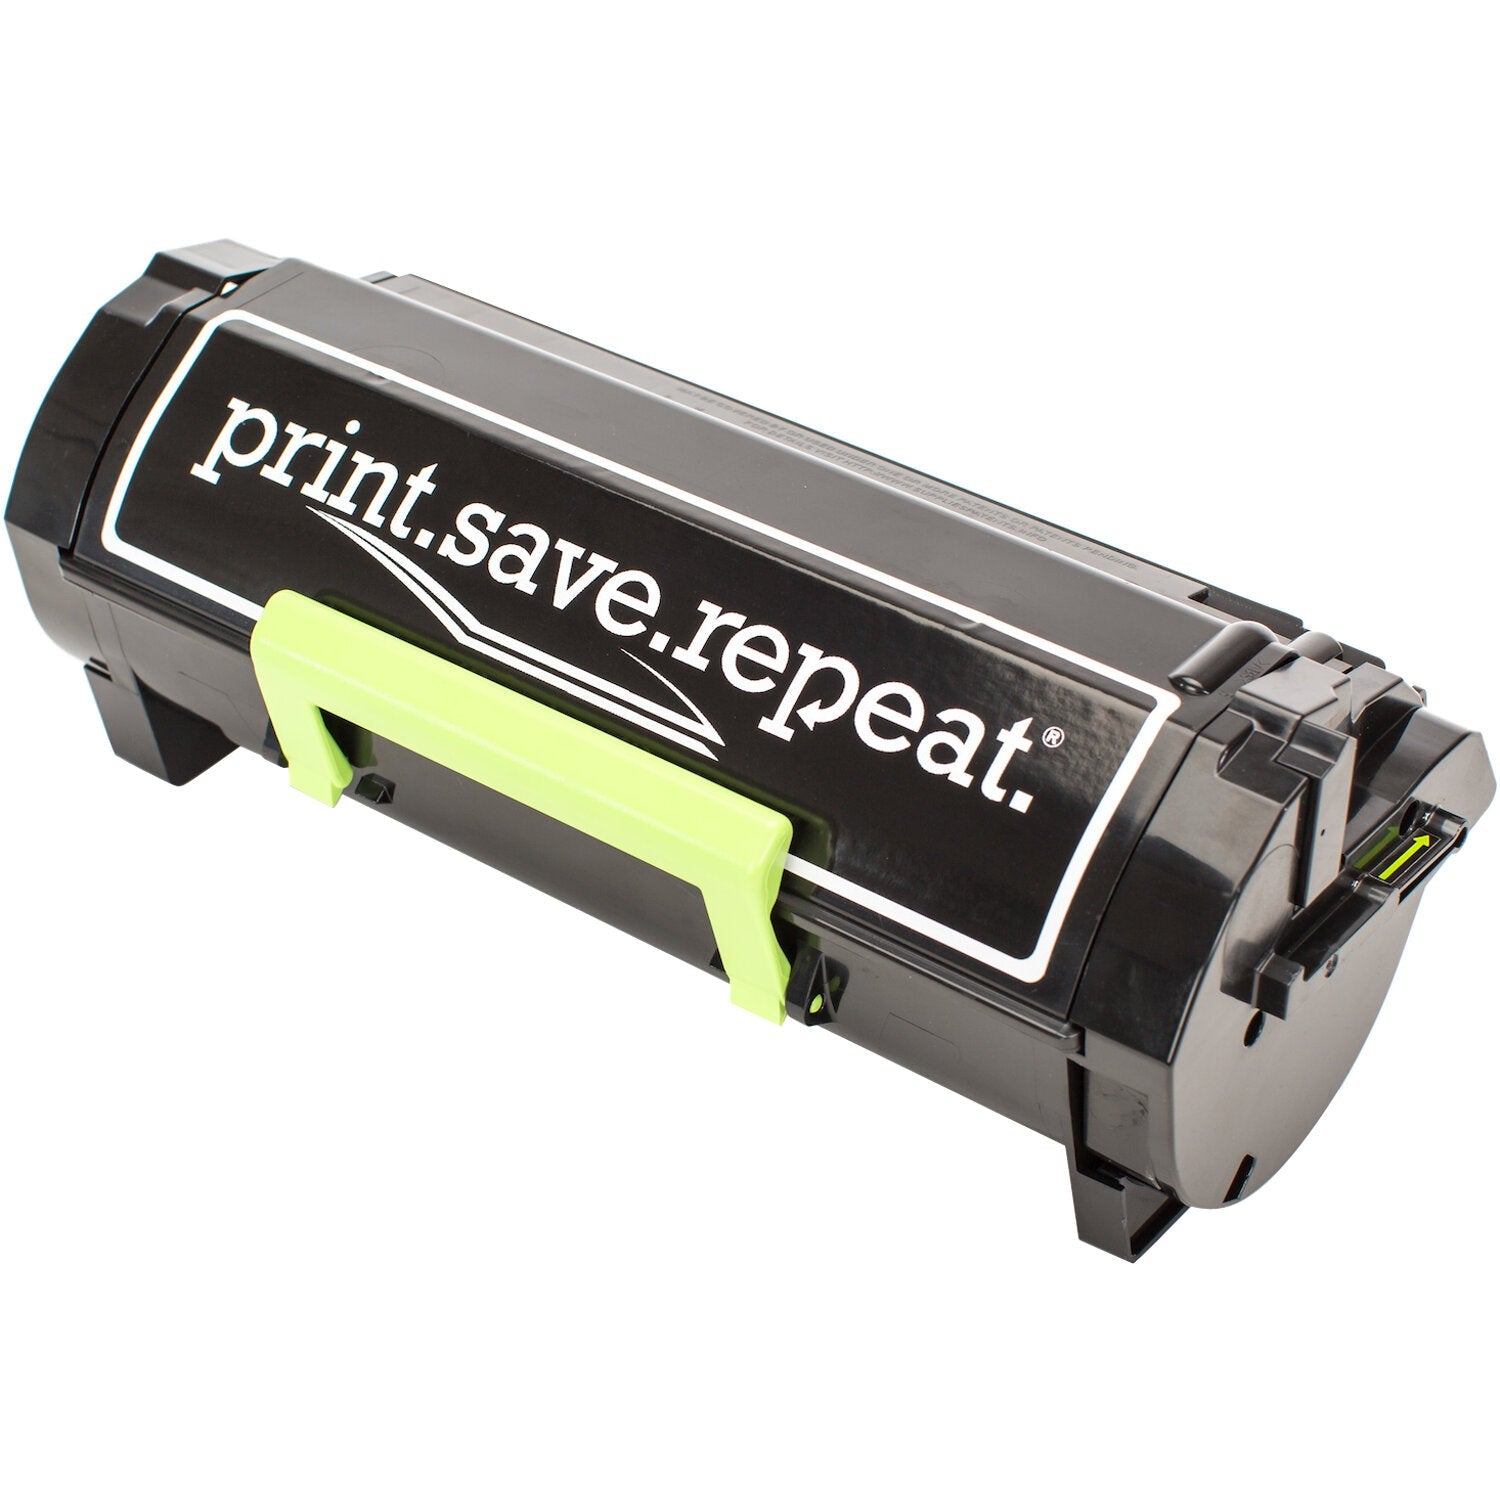 Print.Save.Repeat. Lexmark 51B0HA0 Remanufactured High Yield Toner Cartridge for MS417, MS517, MS617, MX417, MX517, MX617 [8,500 Pages]